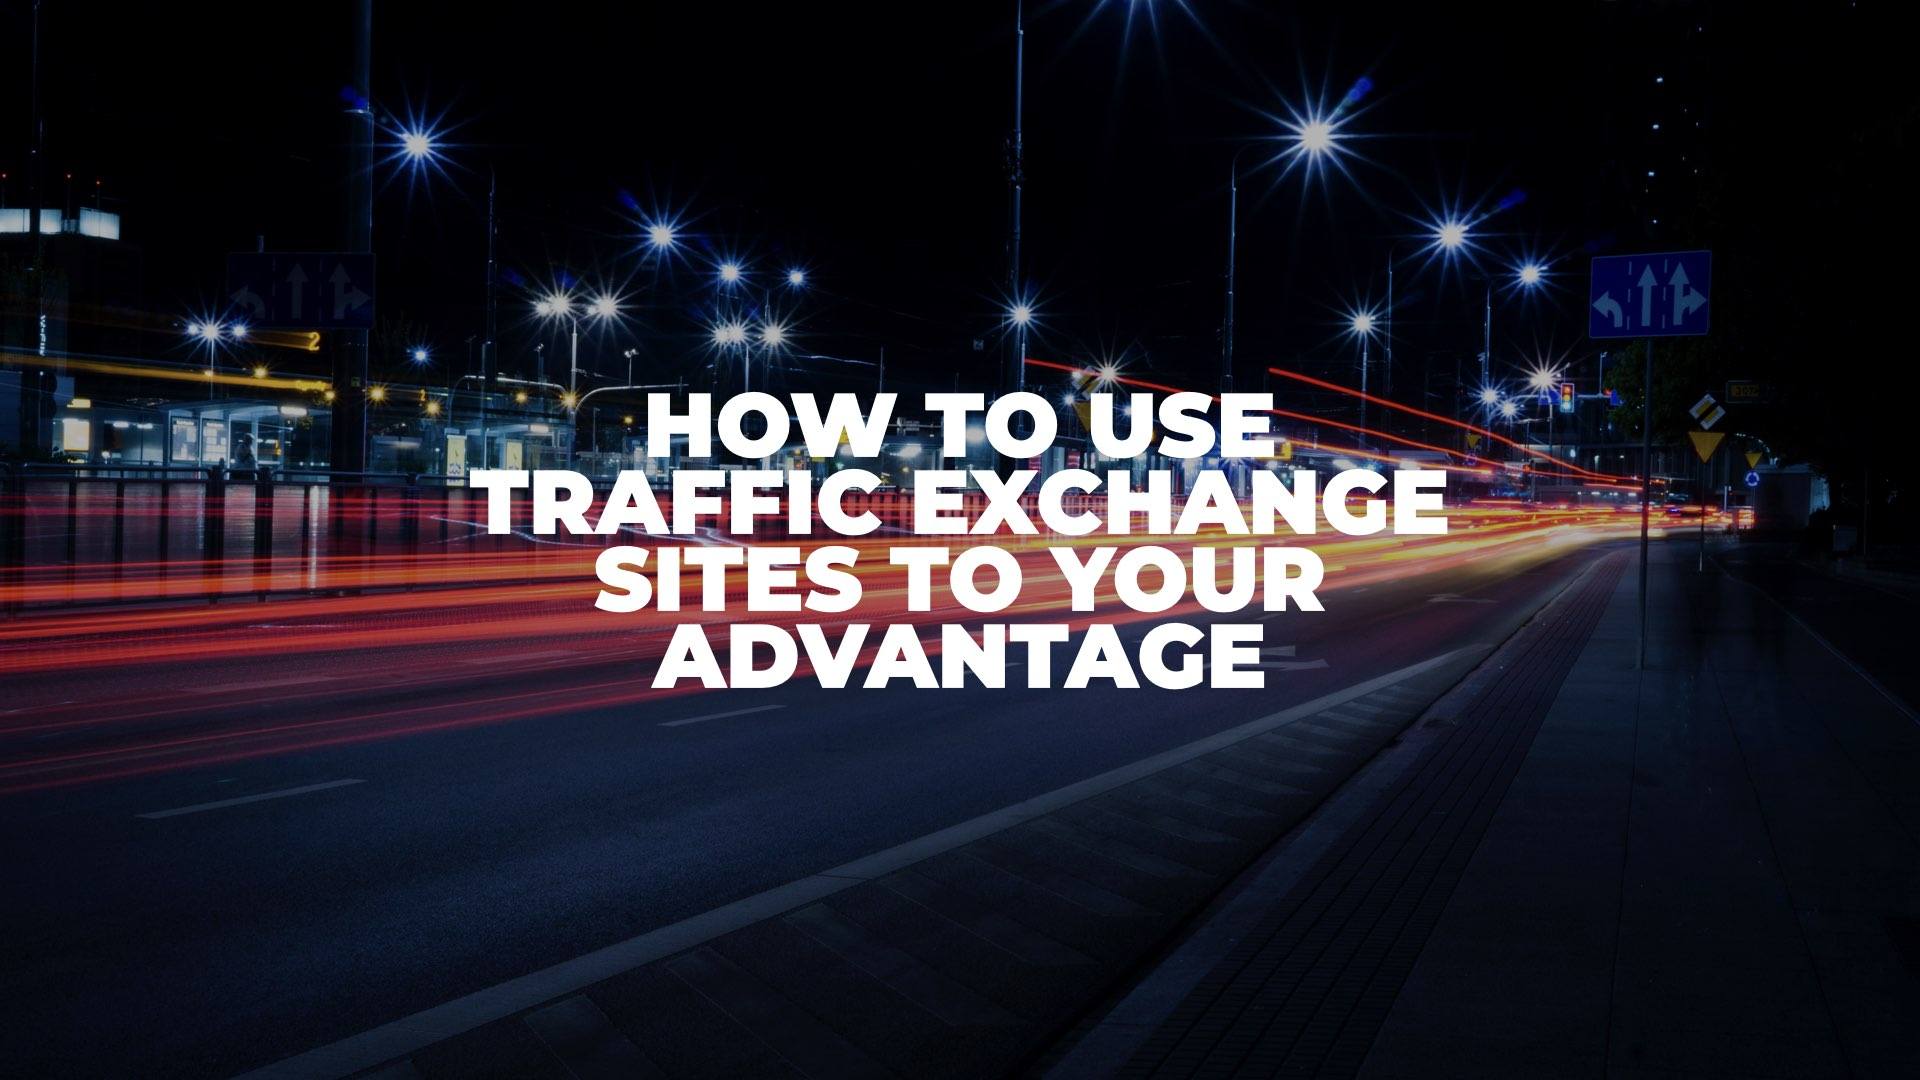 How to use Traffic Exchange Sites - Featured Image